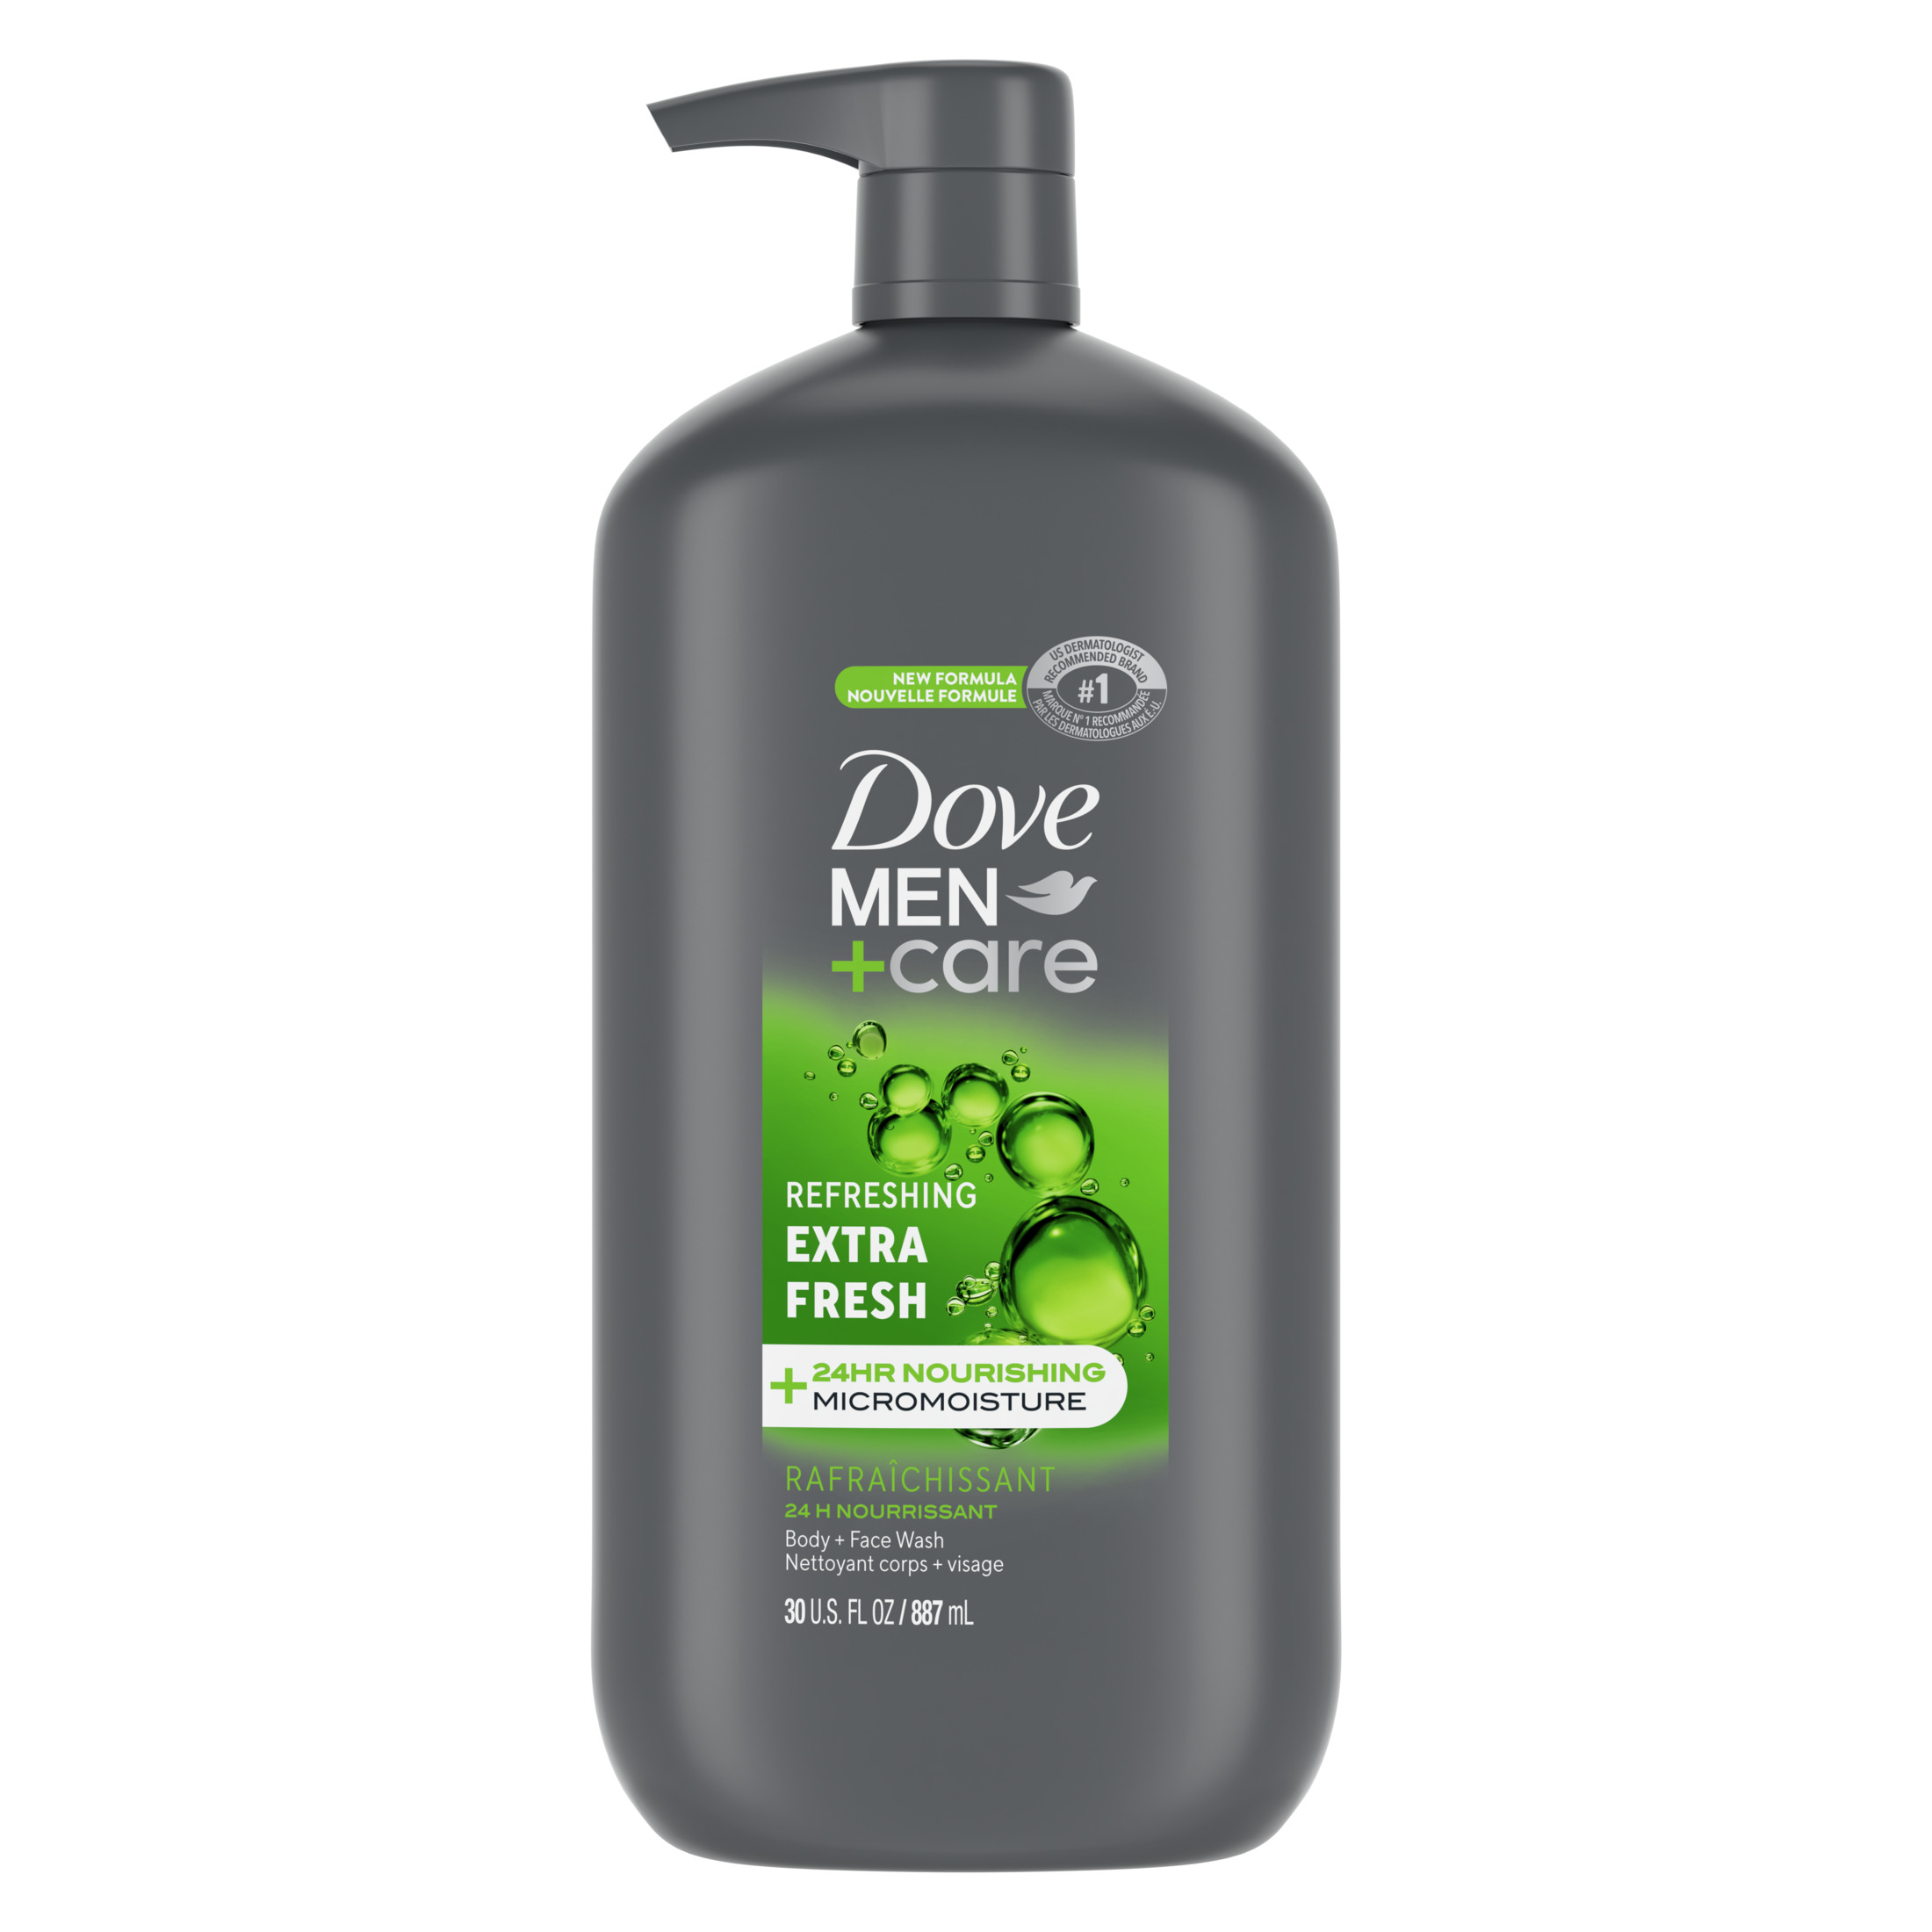 Dove Men+Care Extra Fresh Refreshing Hydrating Men's Face & Body Wash All Skin, 30 oz - image 1 of 11